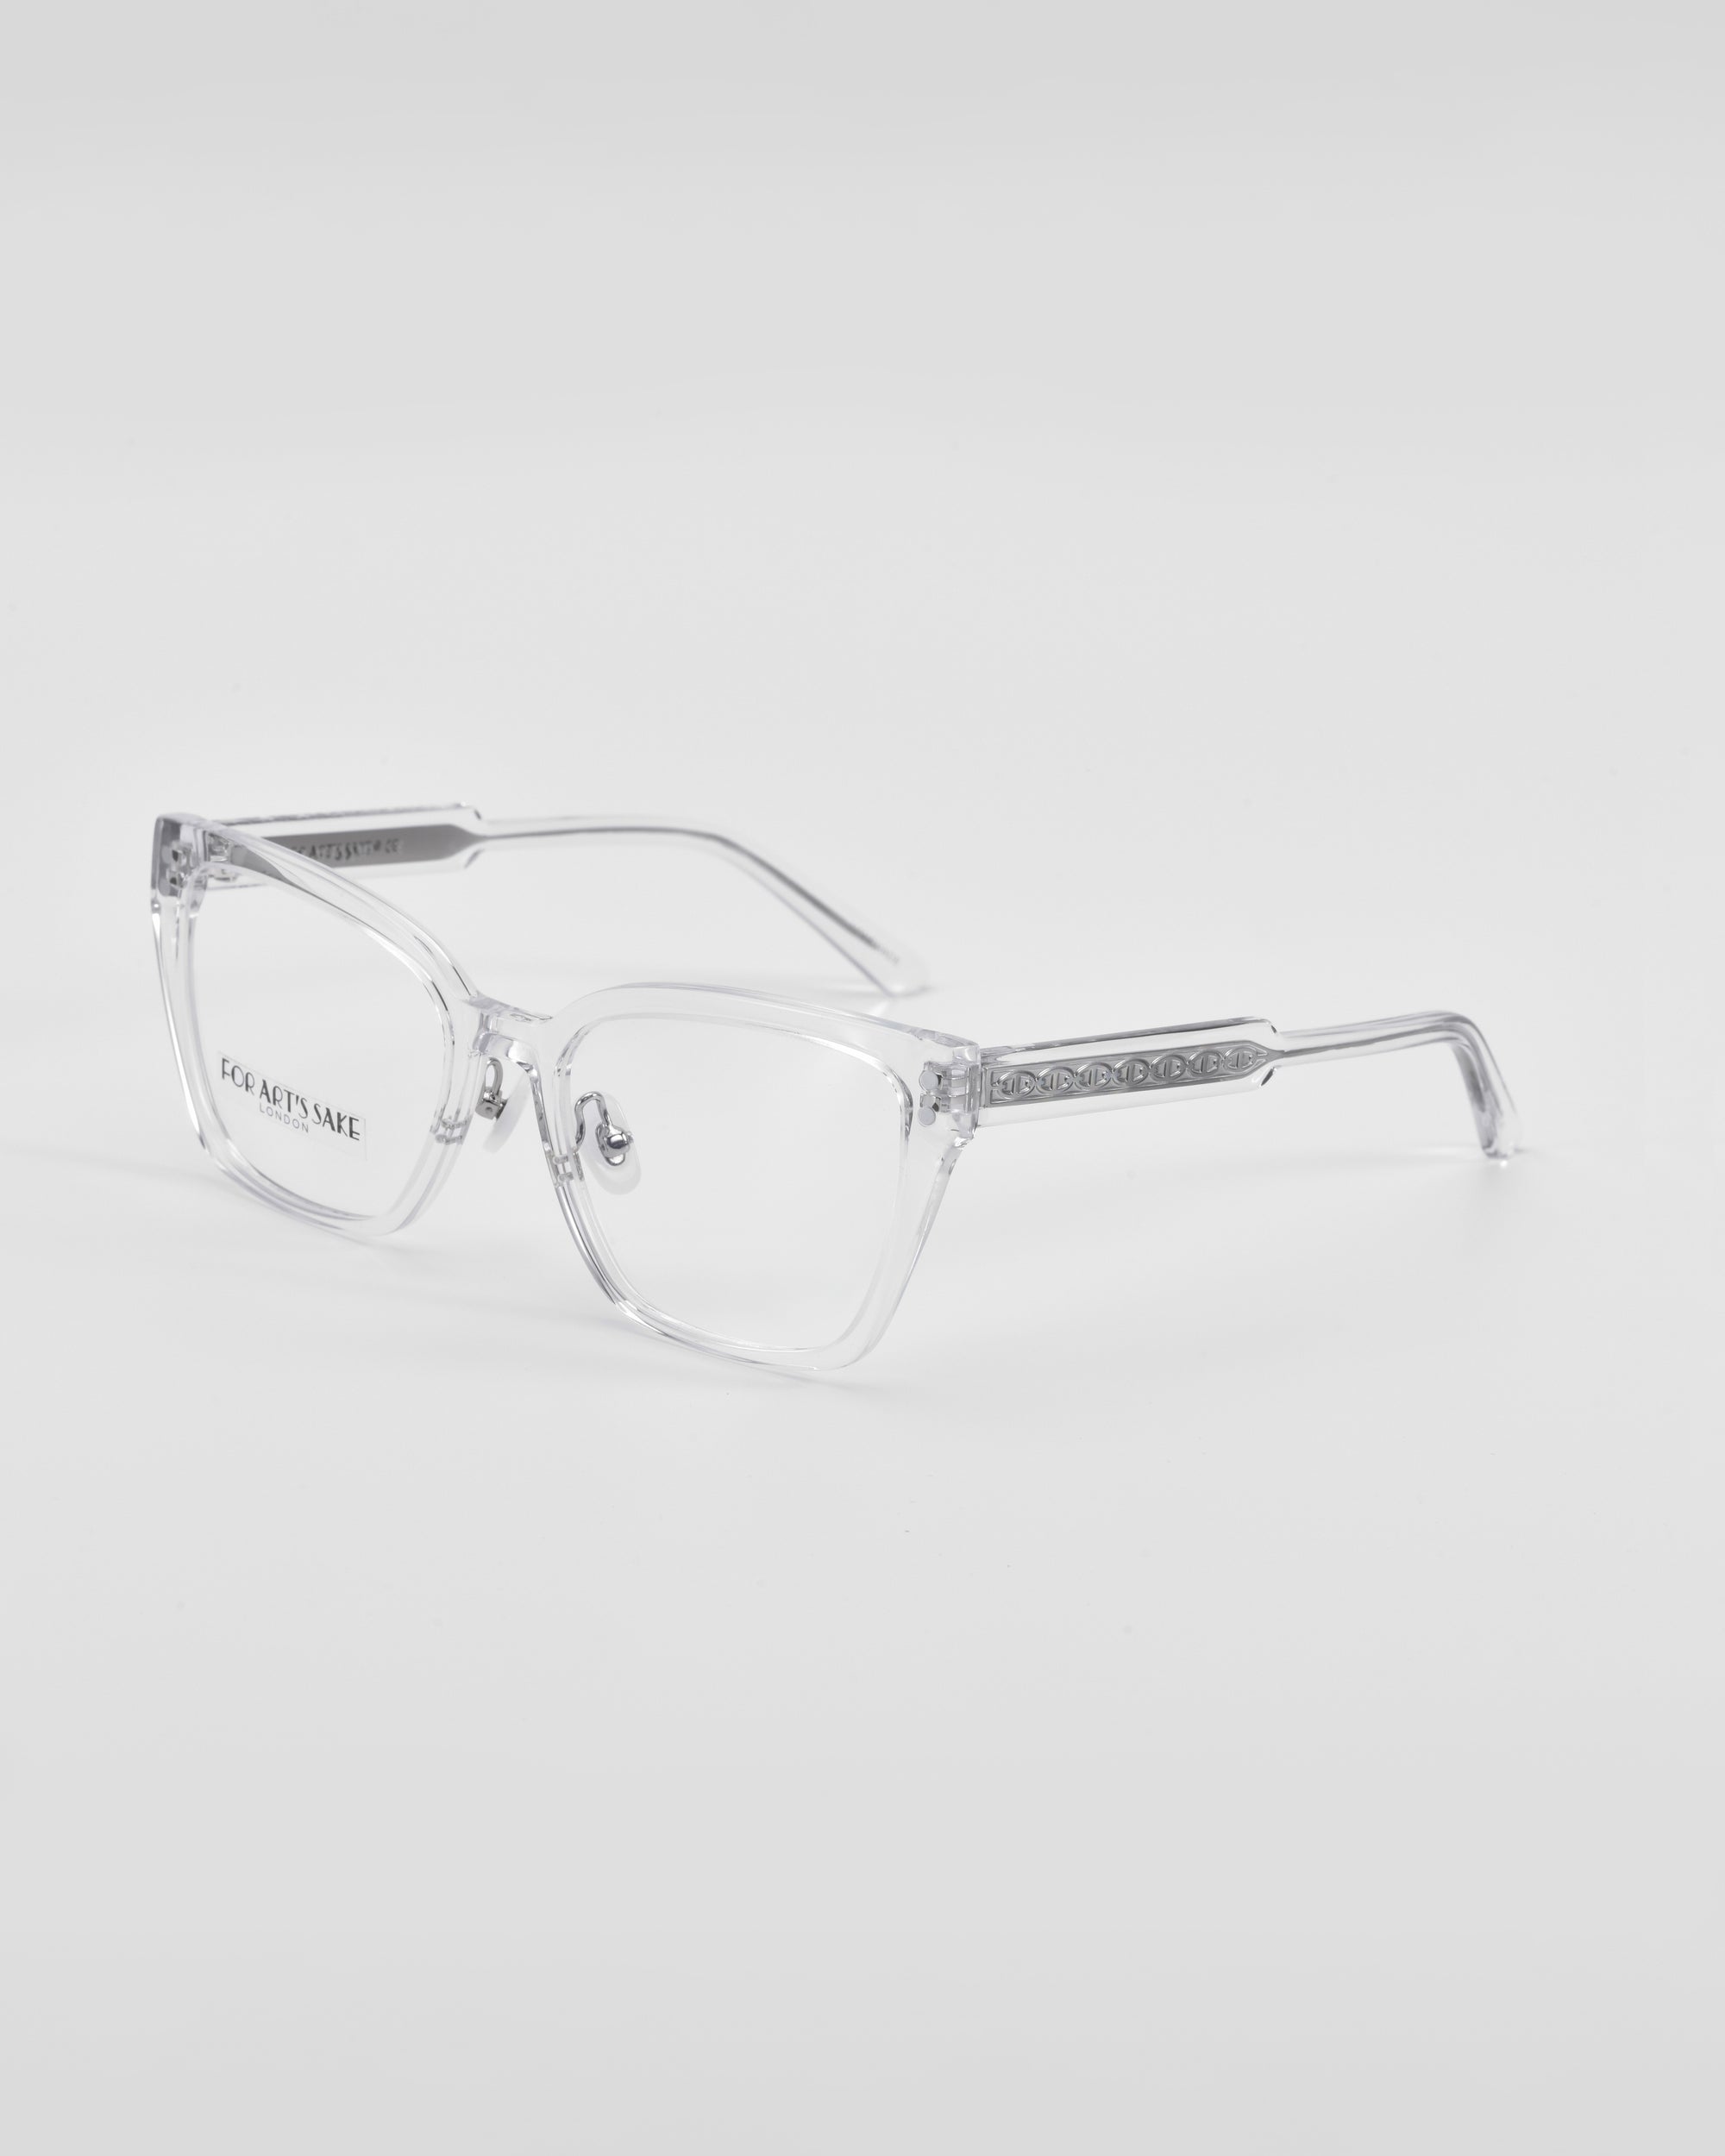 A pair of Abbey eyeglasses by For Art&#39;s Sake® with clear lenses. The eyeglasses have a sleek design with decorated arms featuring a subtle link-chain pattern and small, embedded stones. The brand name &quot;For Art&#39;s Sake®&quot; is visible on the inside of the left temple. The background is plain white.